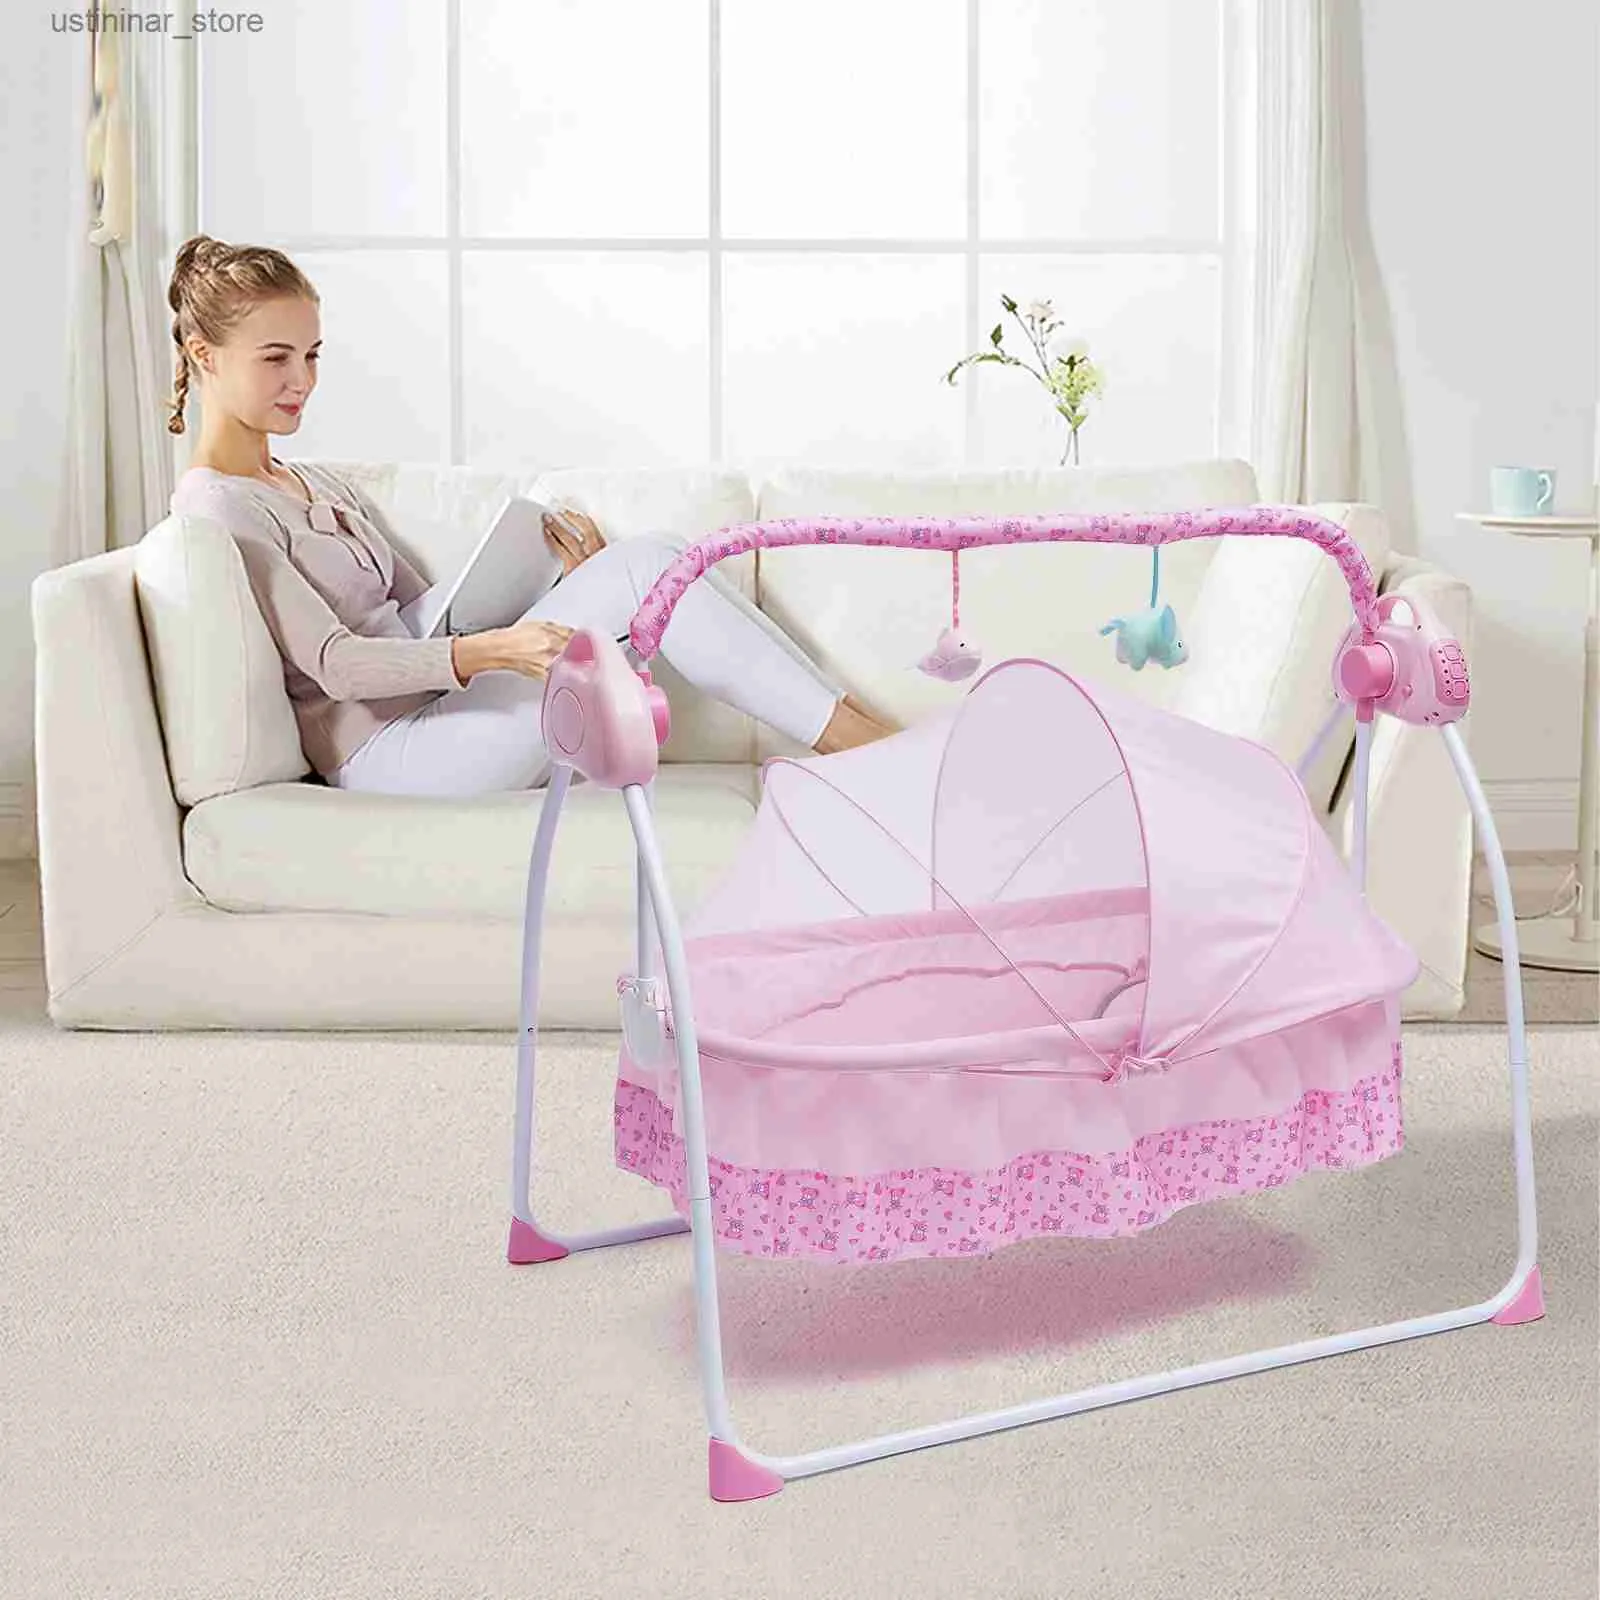 Baby Cribs 5 Gears Adjustable Baby Crib Cradle Electric Auto-Swing Rocking Bassinet Timer Bluetooth Nursery Furniture + Mat L416